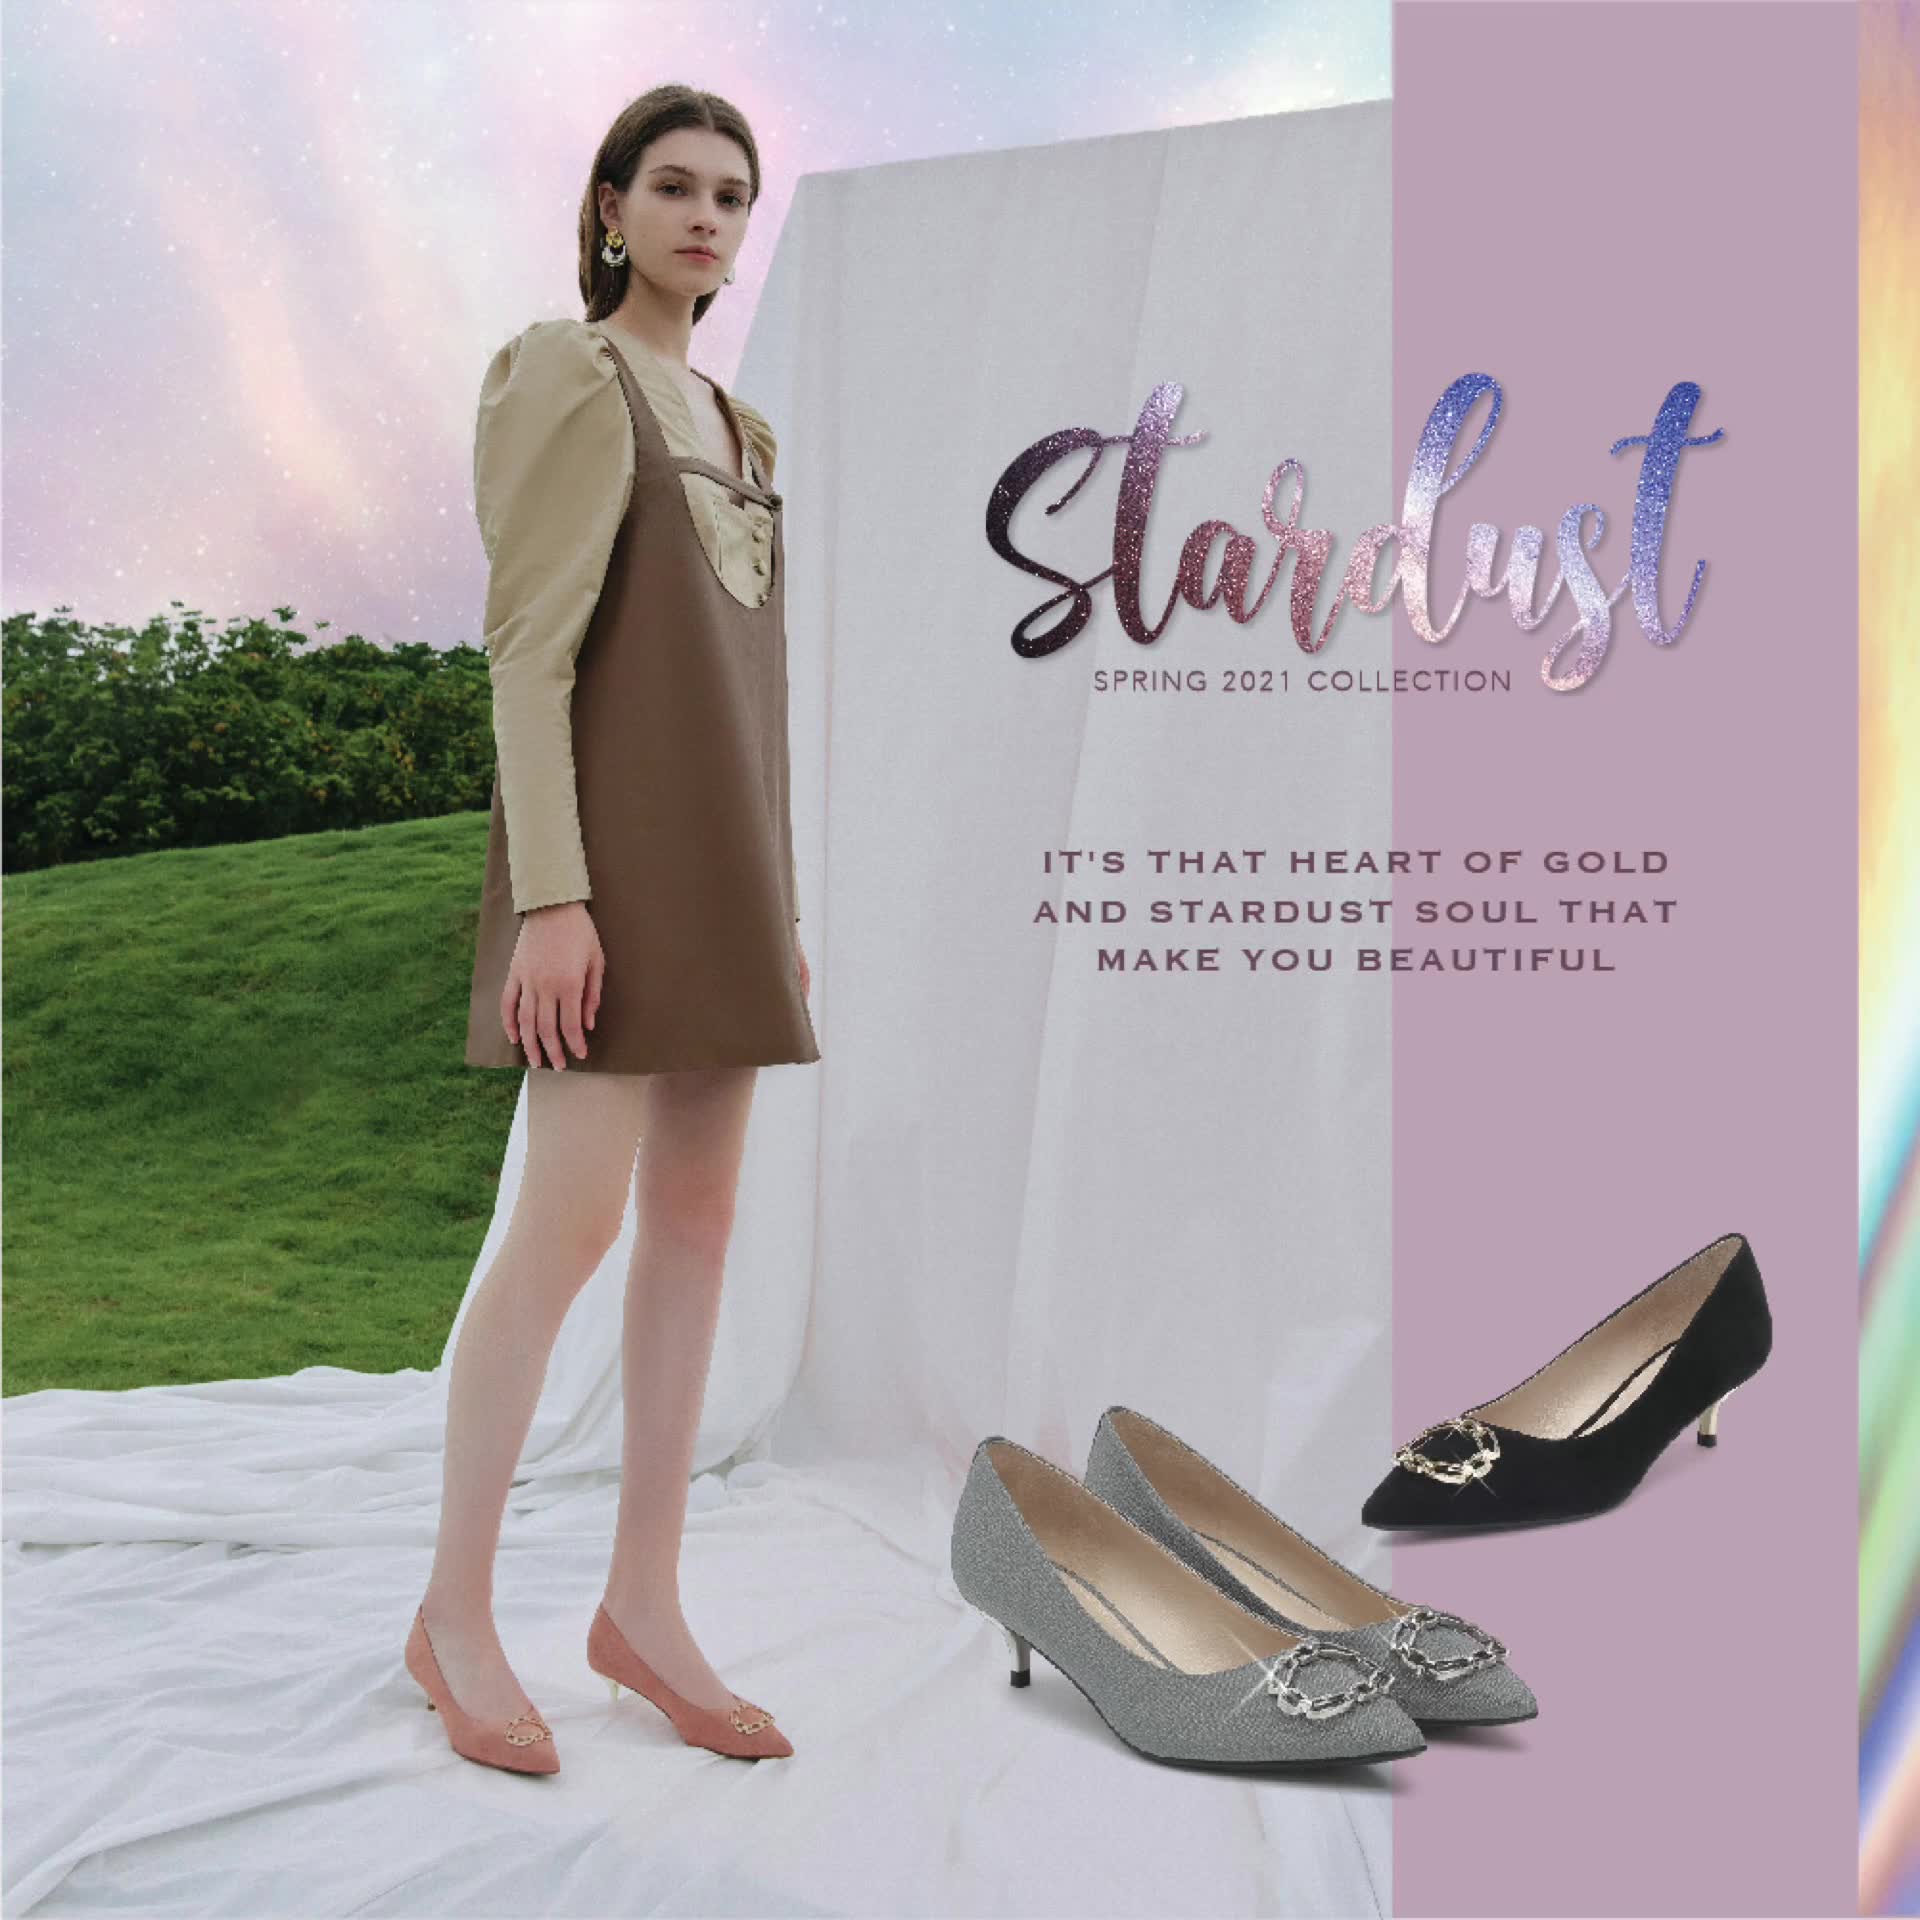 Let's start the new year with one sparkling step ahead #joypeacehk #SS21 #NewArrival #Stardust 